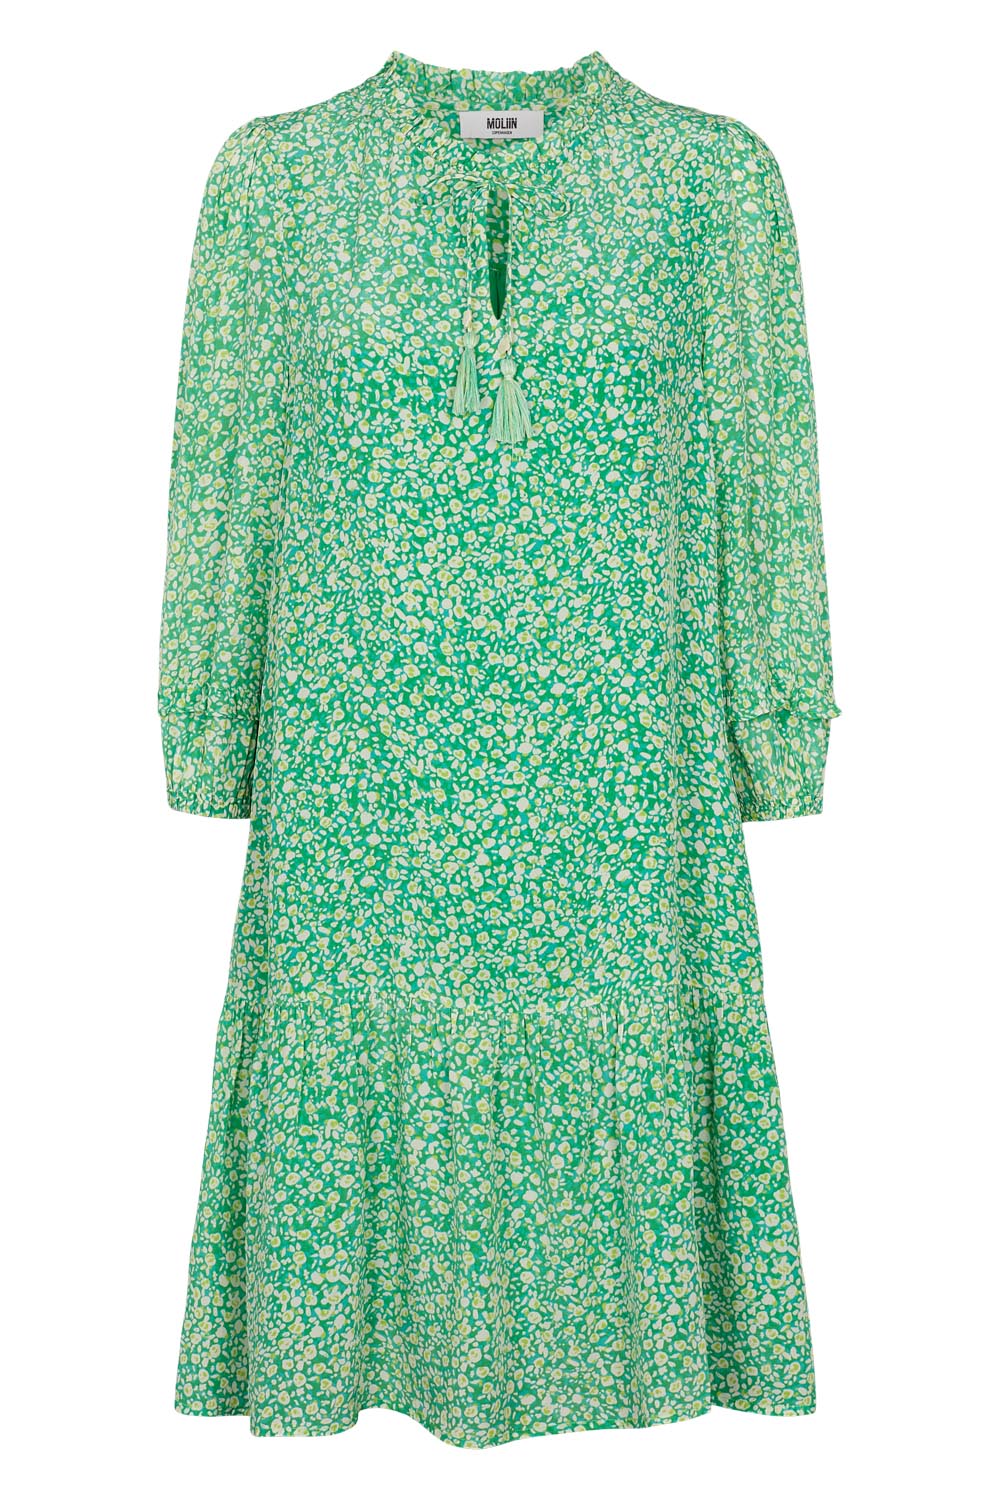 Green ditsy floral midi dress with ruffle collar midi full sleeves and elasticated cuffs with ruffle details